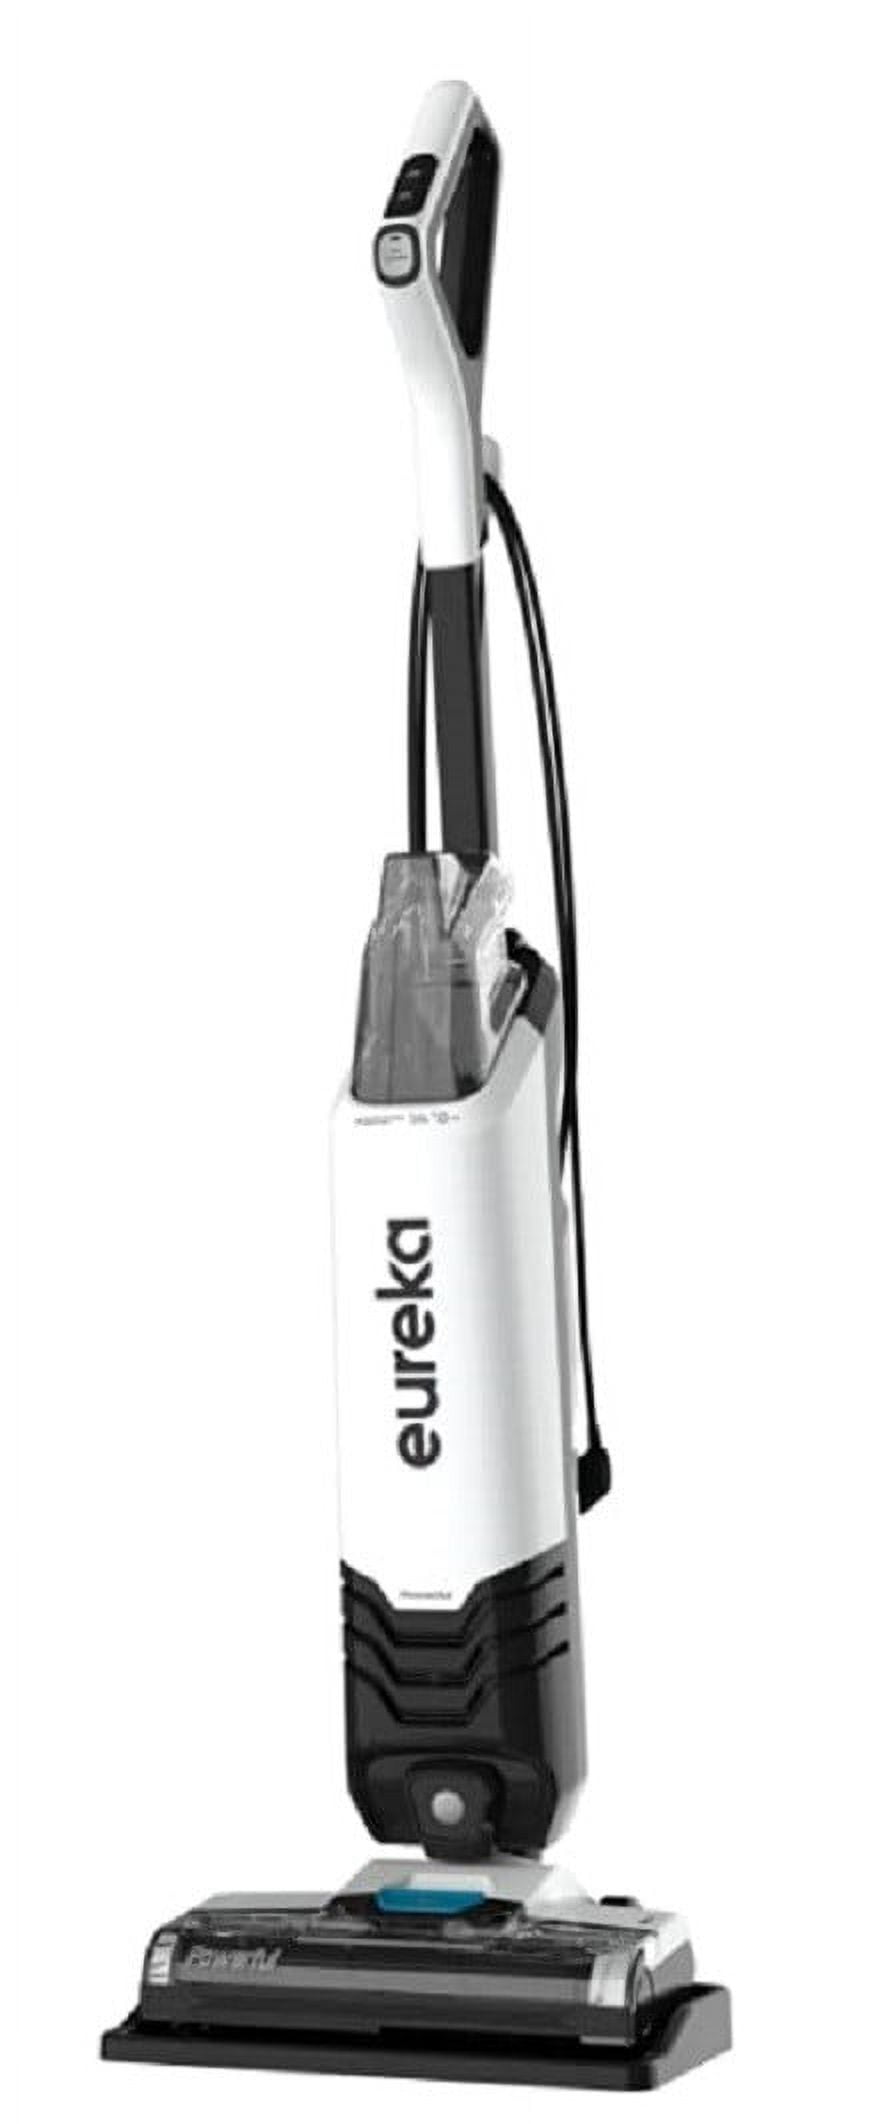 Eureka Lightweight Corded Stick Cleaner Powerful Suction Convenient Handheld VAC with Filter for Hard Floor, 3-in-1 Vacuum, Purple